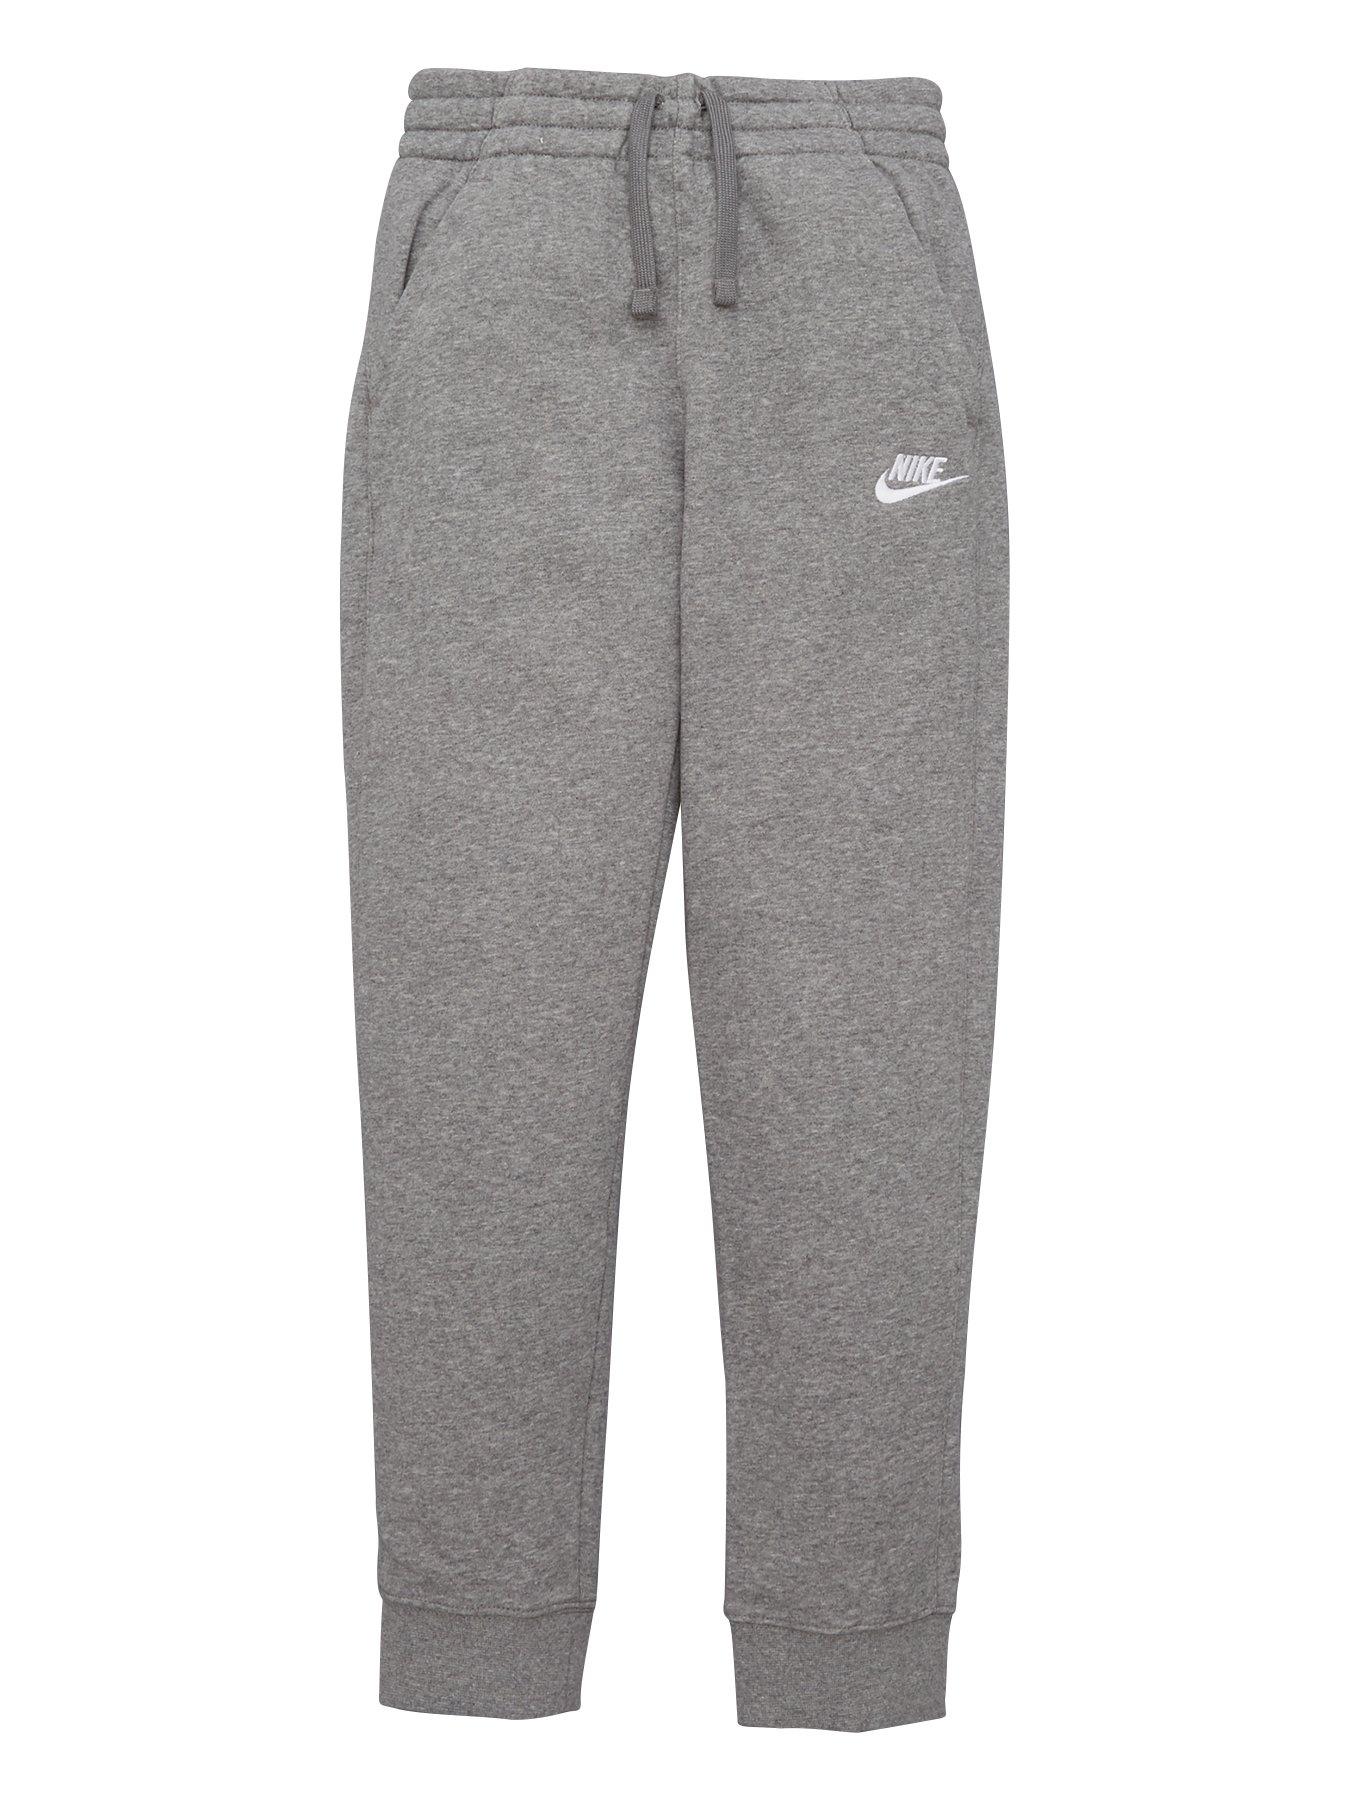  Boys NSW Club French Terry Jogger Pant - Grey